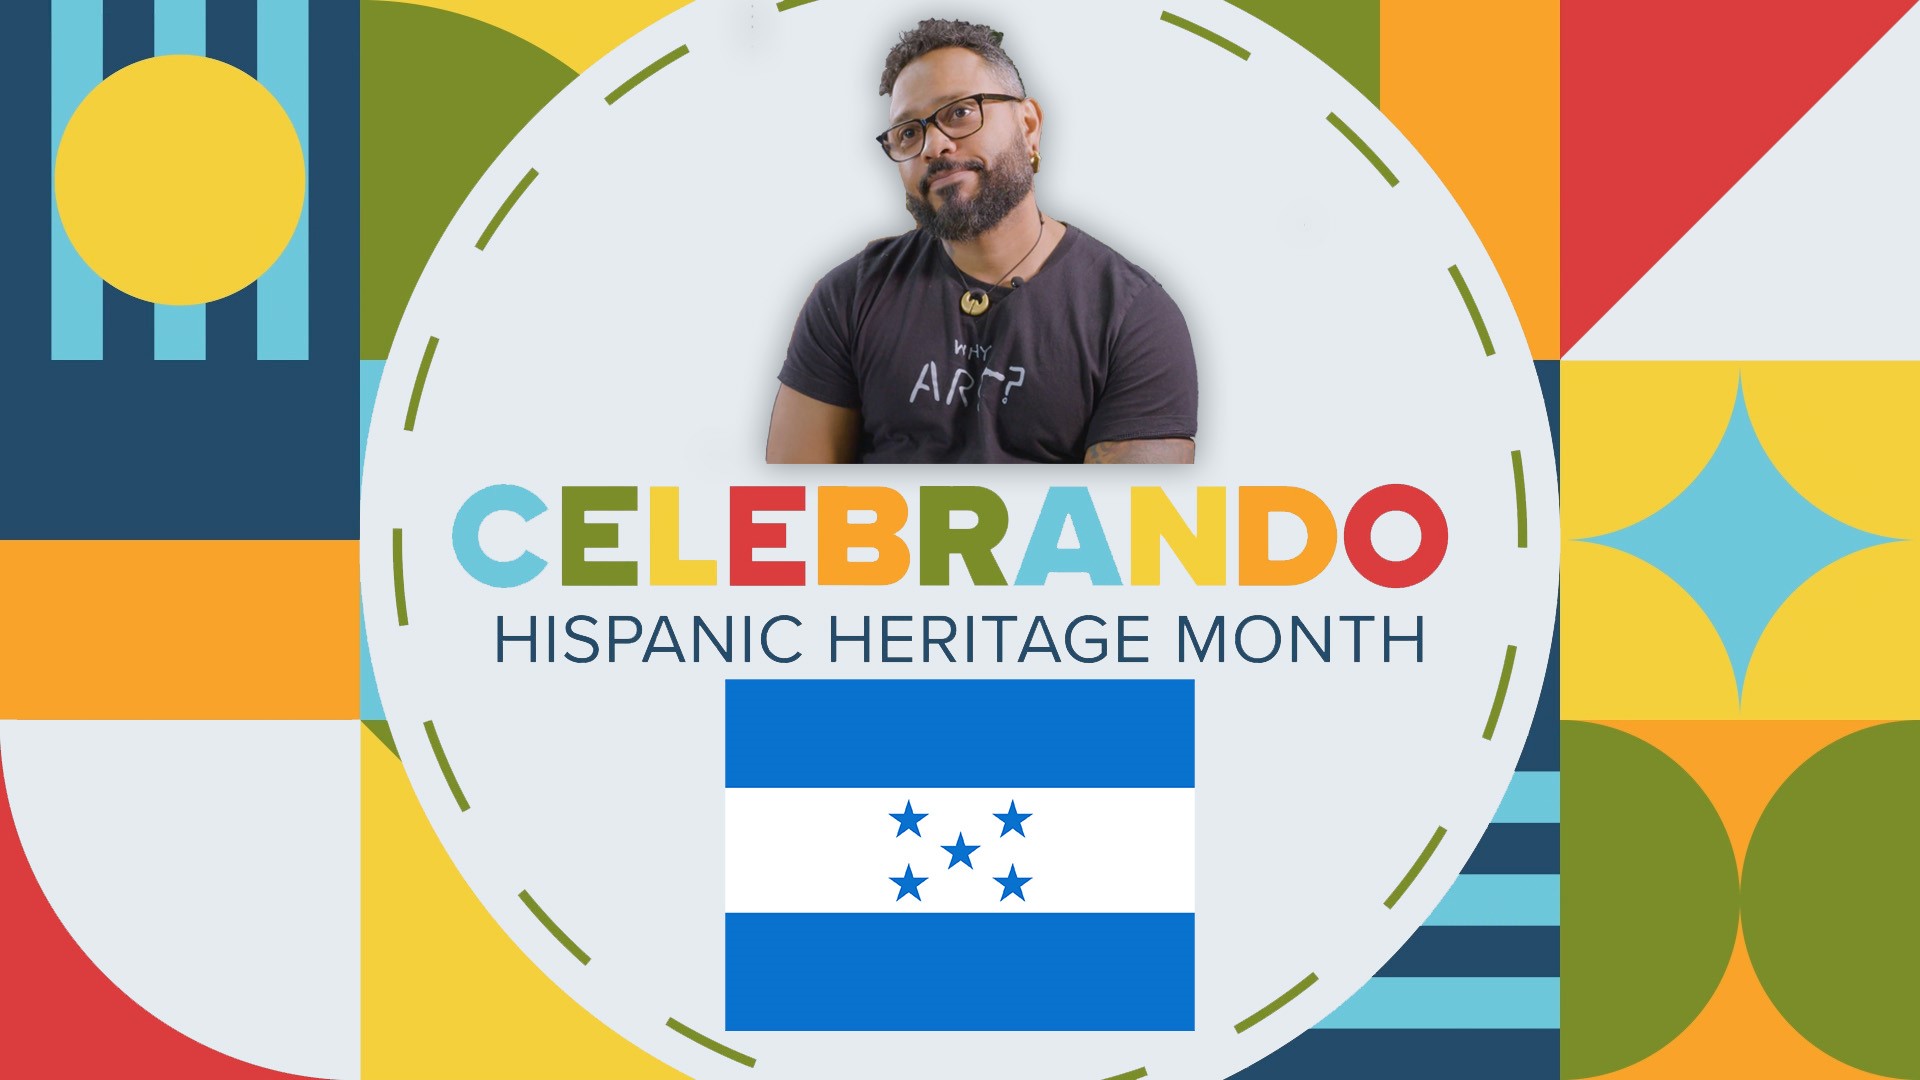 Davis Ramses is from Tegucigalpa, Honduras, and identifies as Latino. He has a lot of pride in being Latino especially because of how warm the people are.